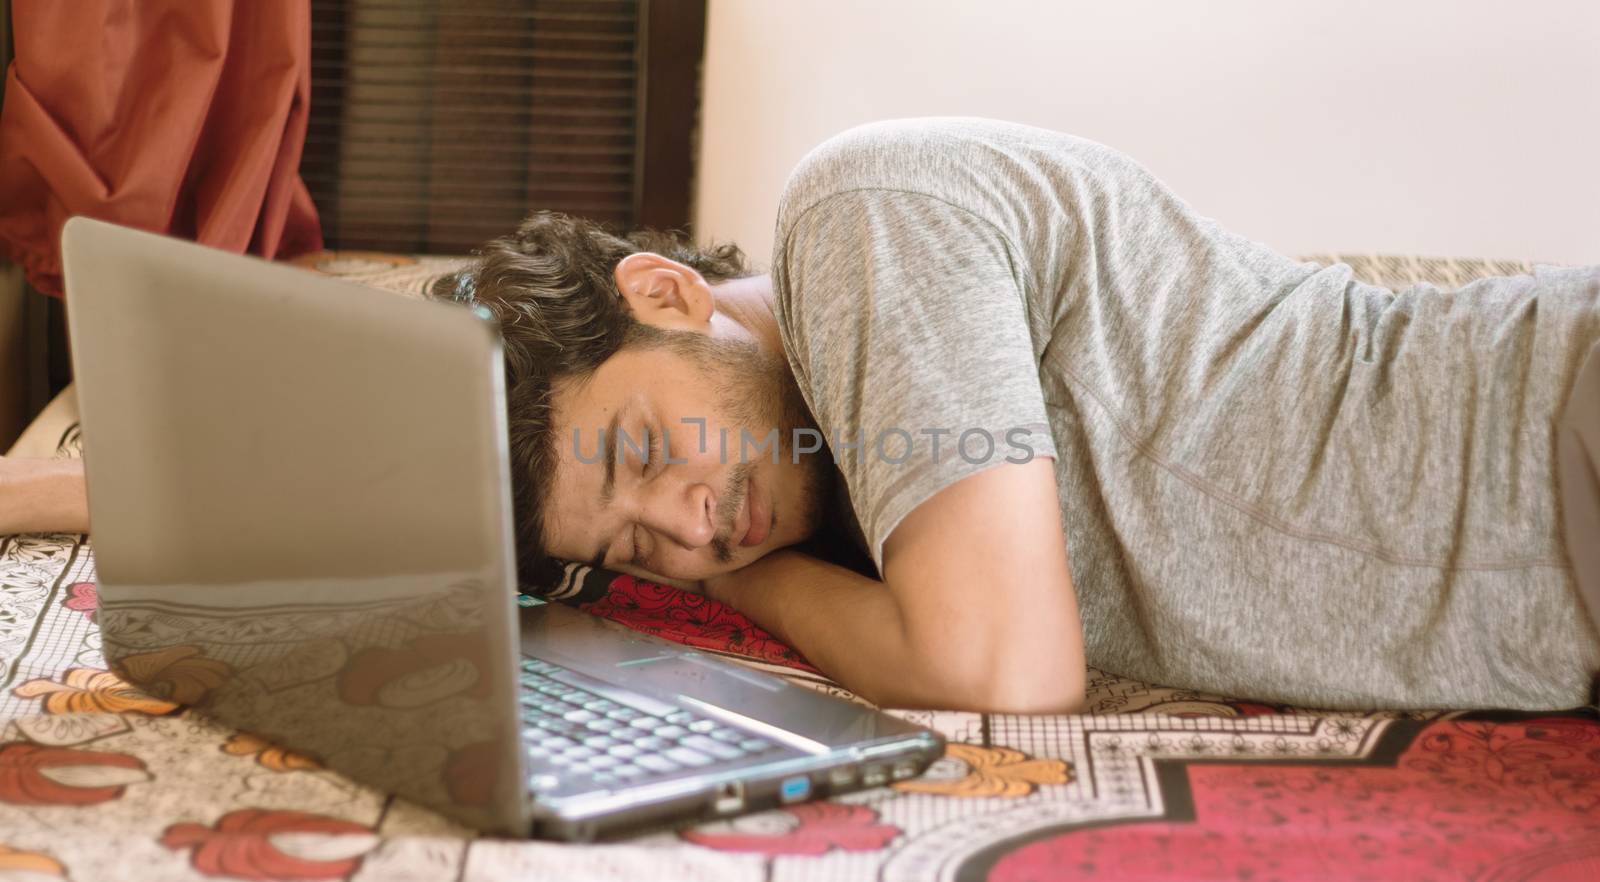 Tired young man sleeping in bed with laptop - hard work, laziness of working from home or WFH during coronavirus or covid-19 lock down concept